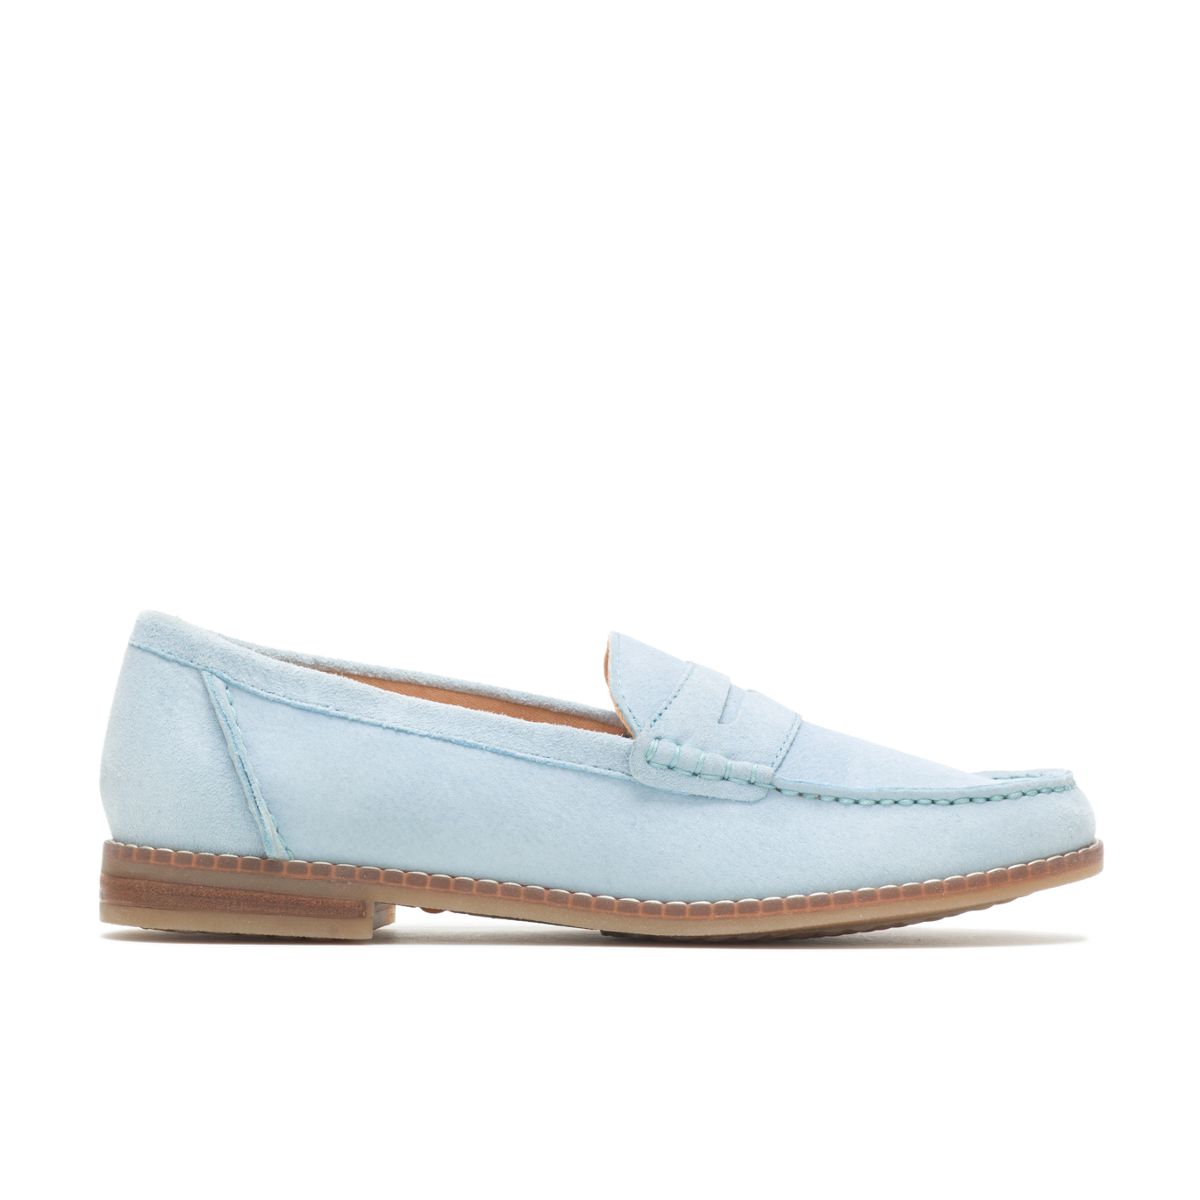 hush puppies suede loafers